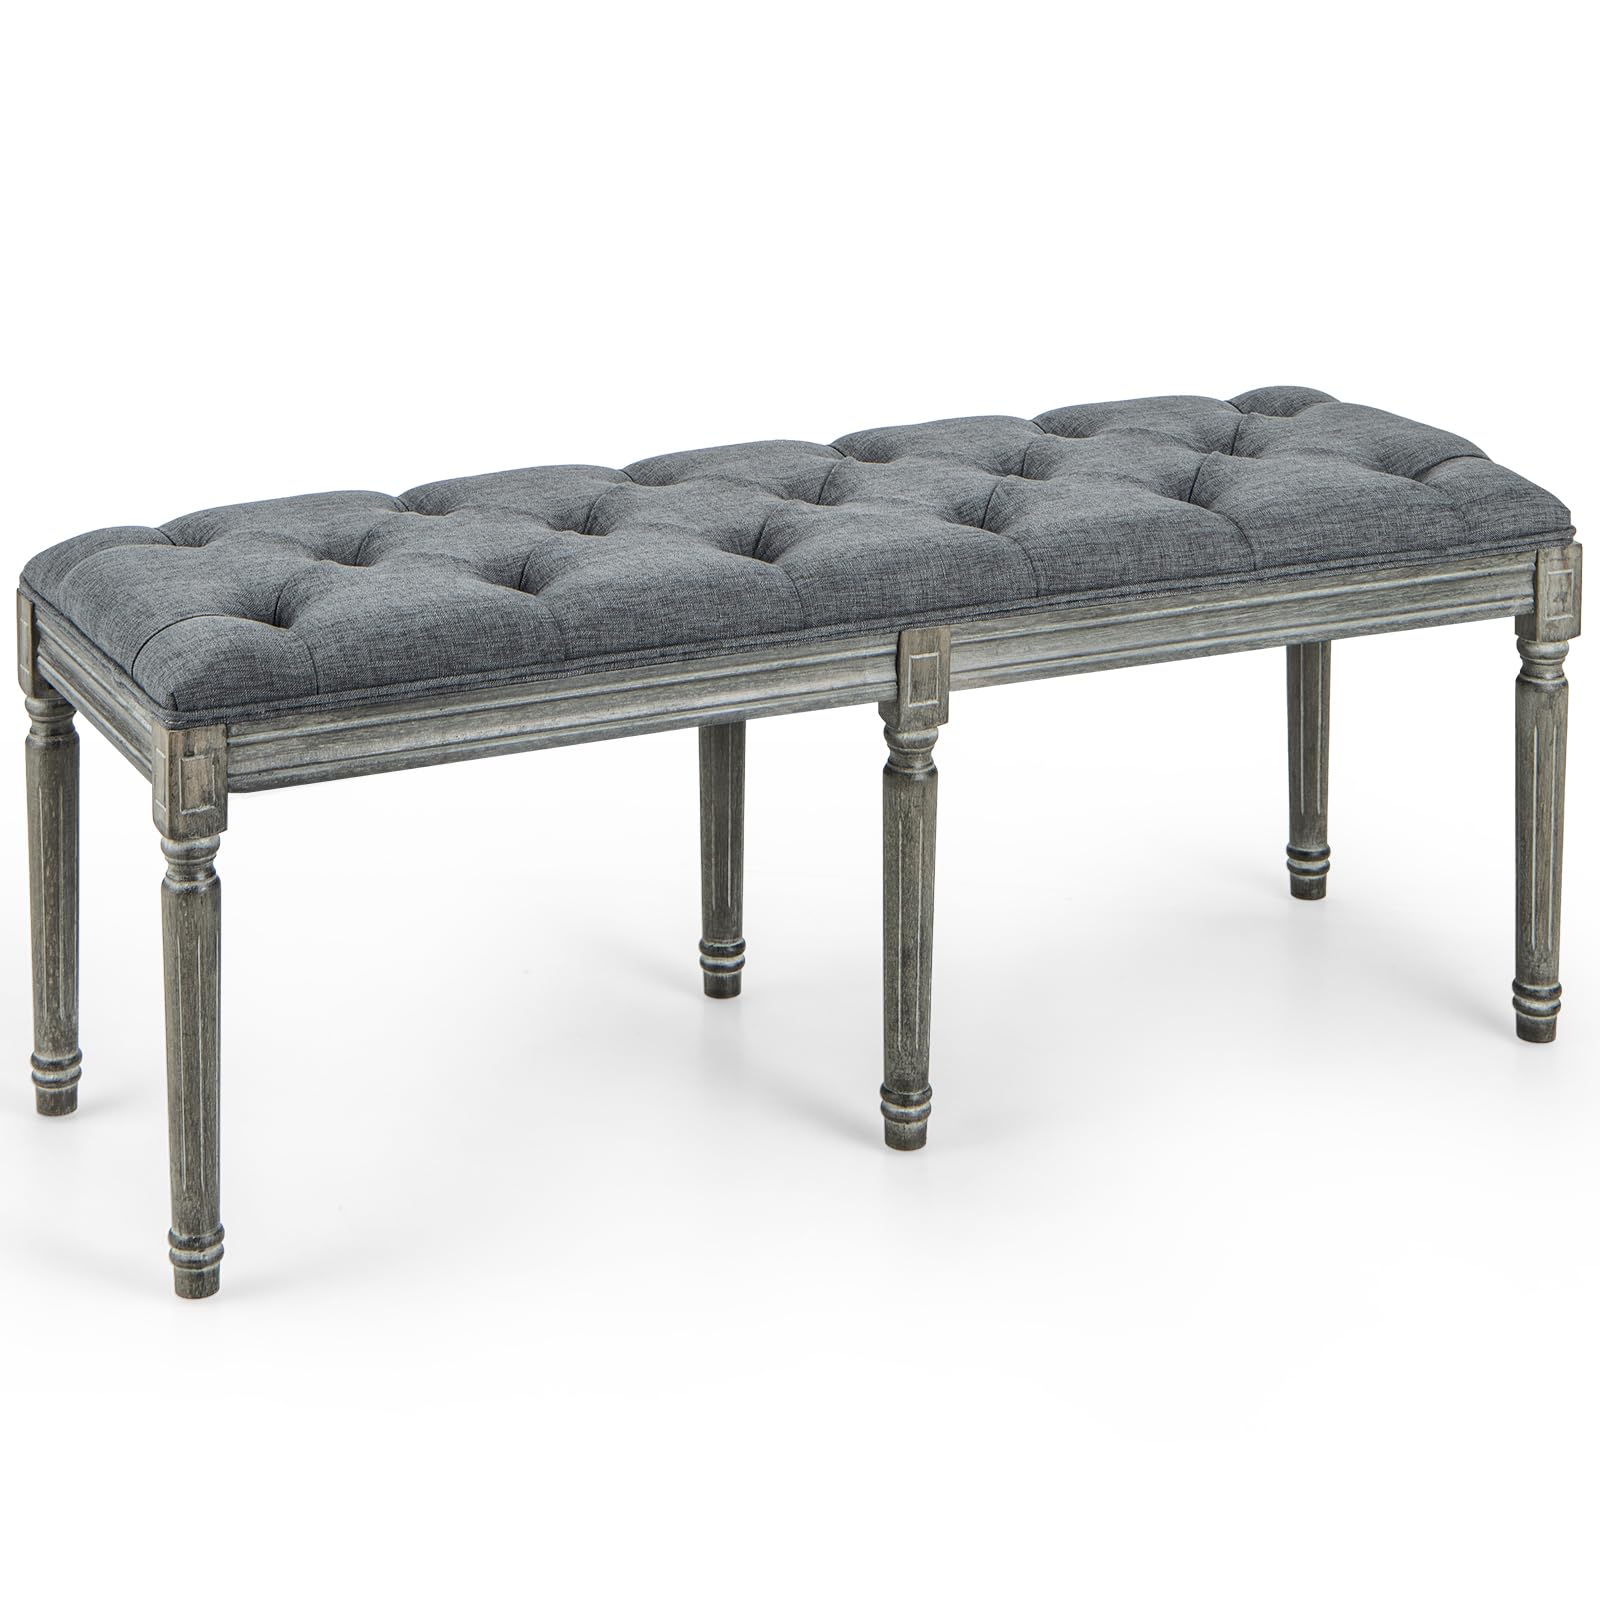 Giantex Vintage Dining Room Bench